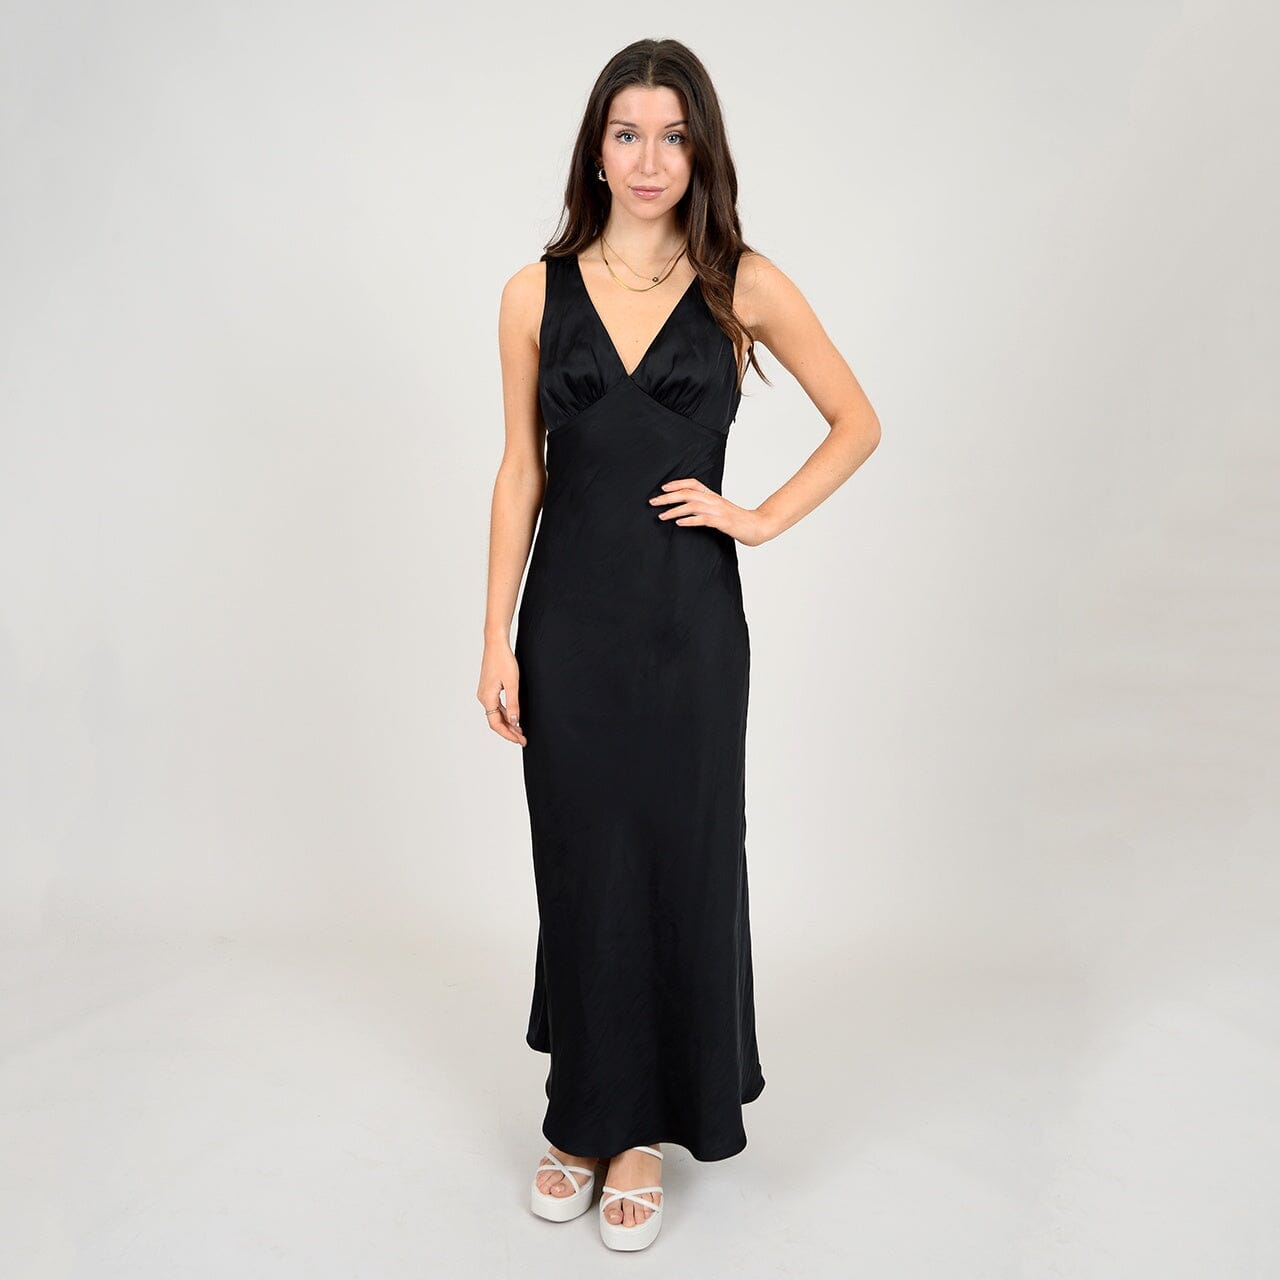 SILKY MAXI DRESS WITH SHIRRED BUST Dress RD STYLE 